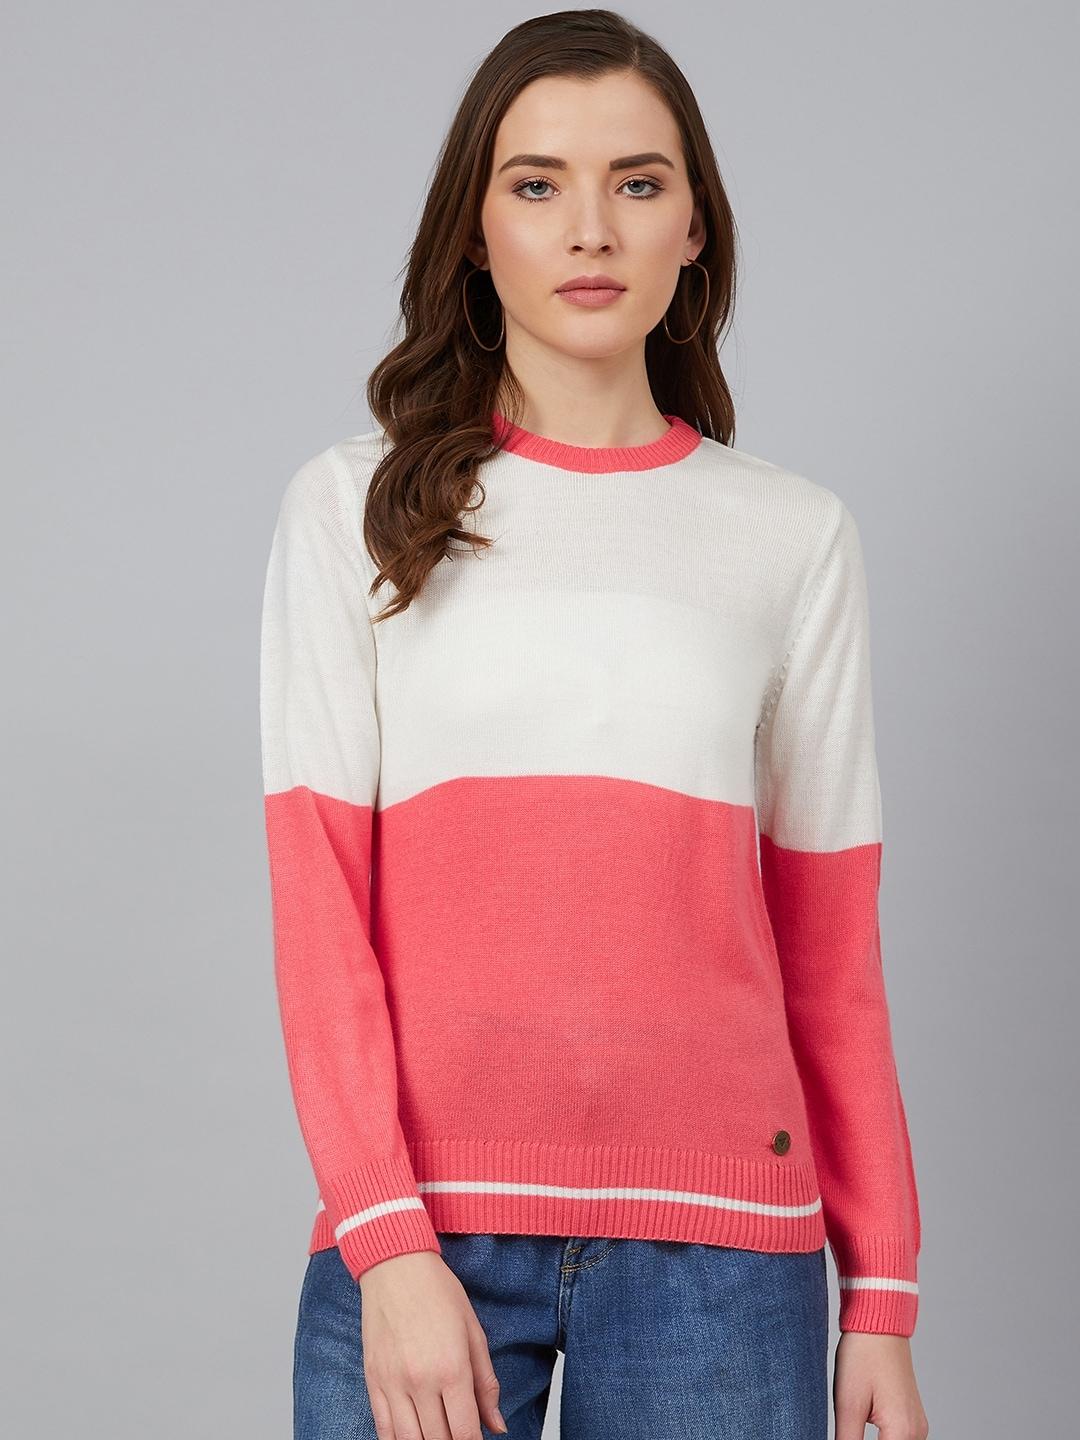 cayman women coral pink & off-white colourblocked acrylic pullover sweater